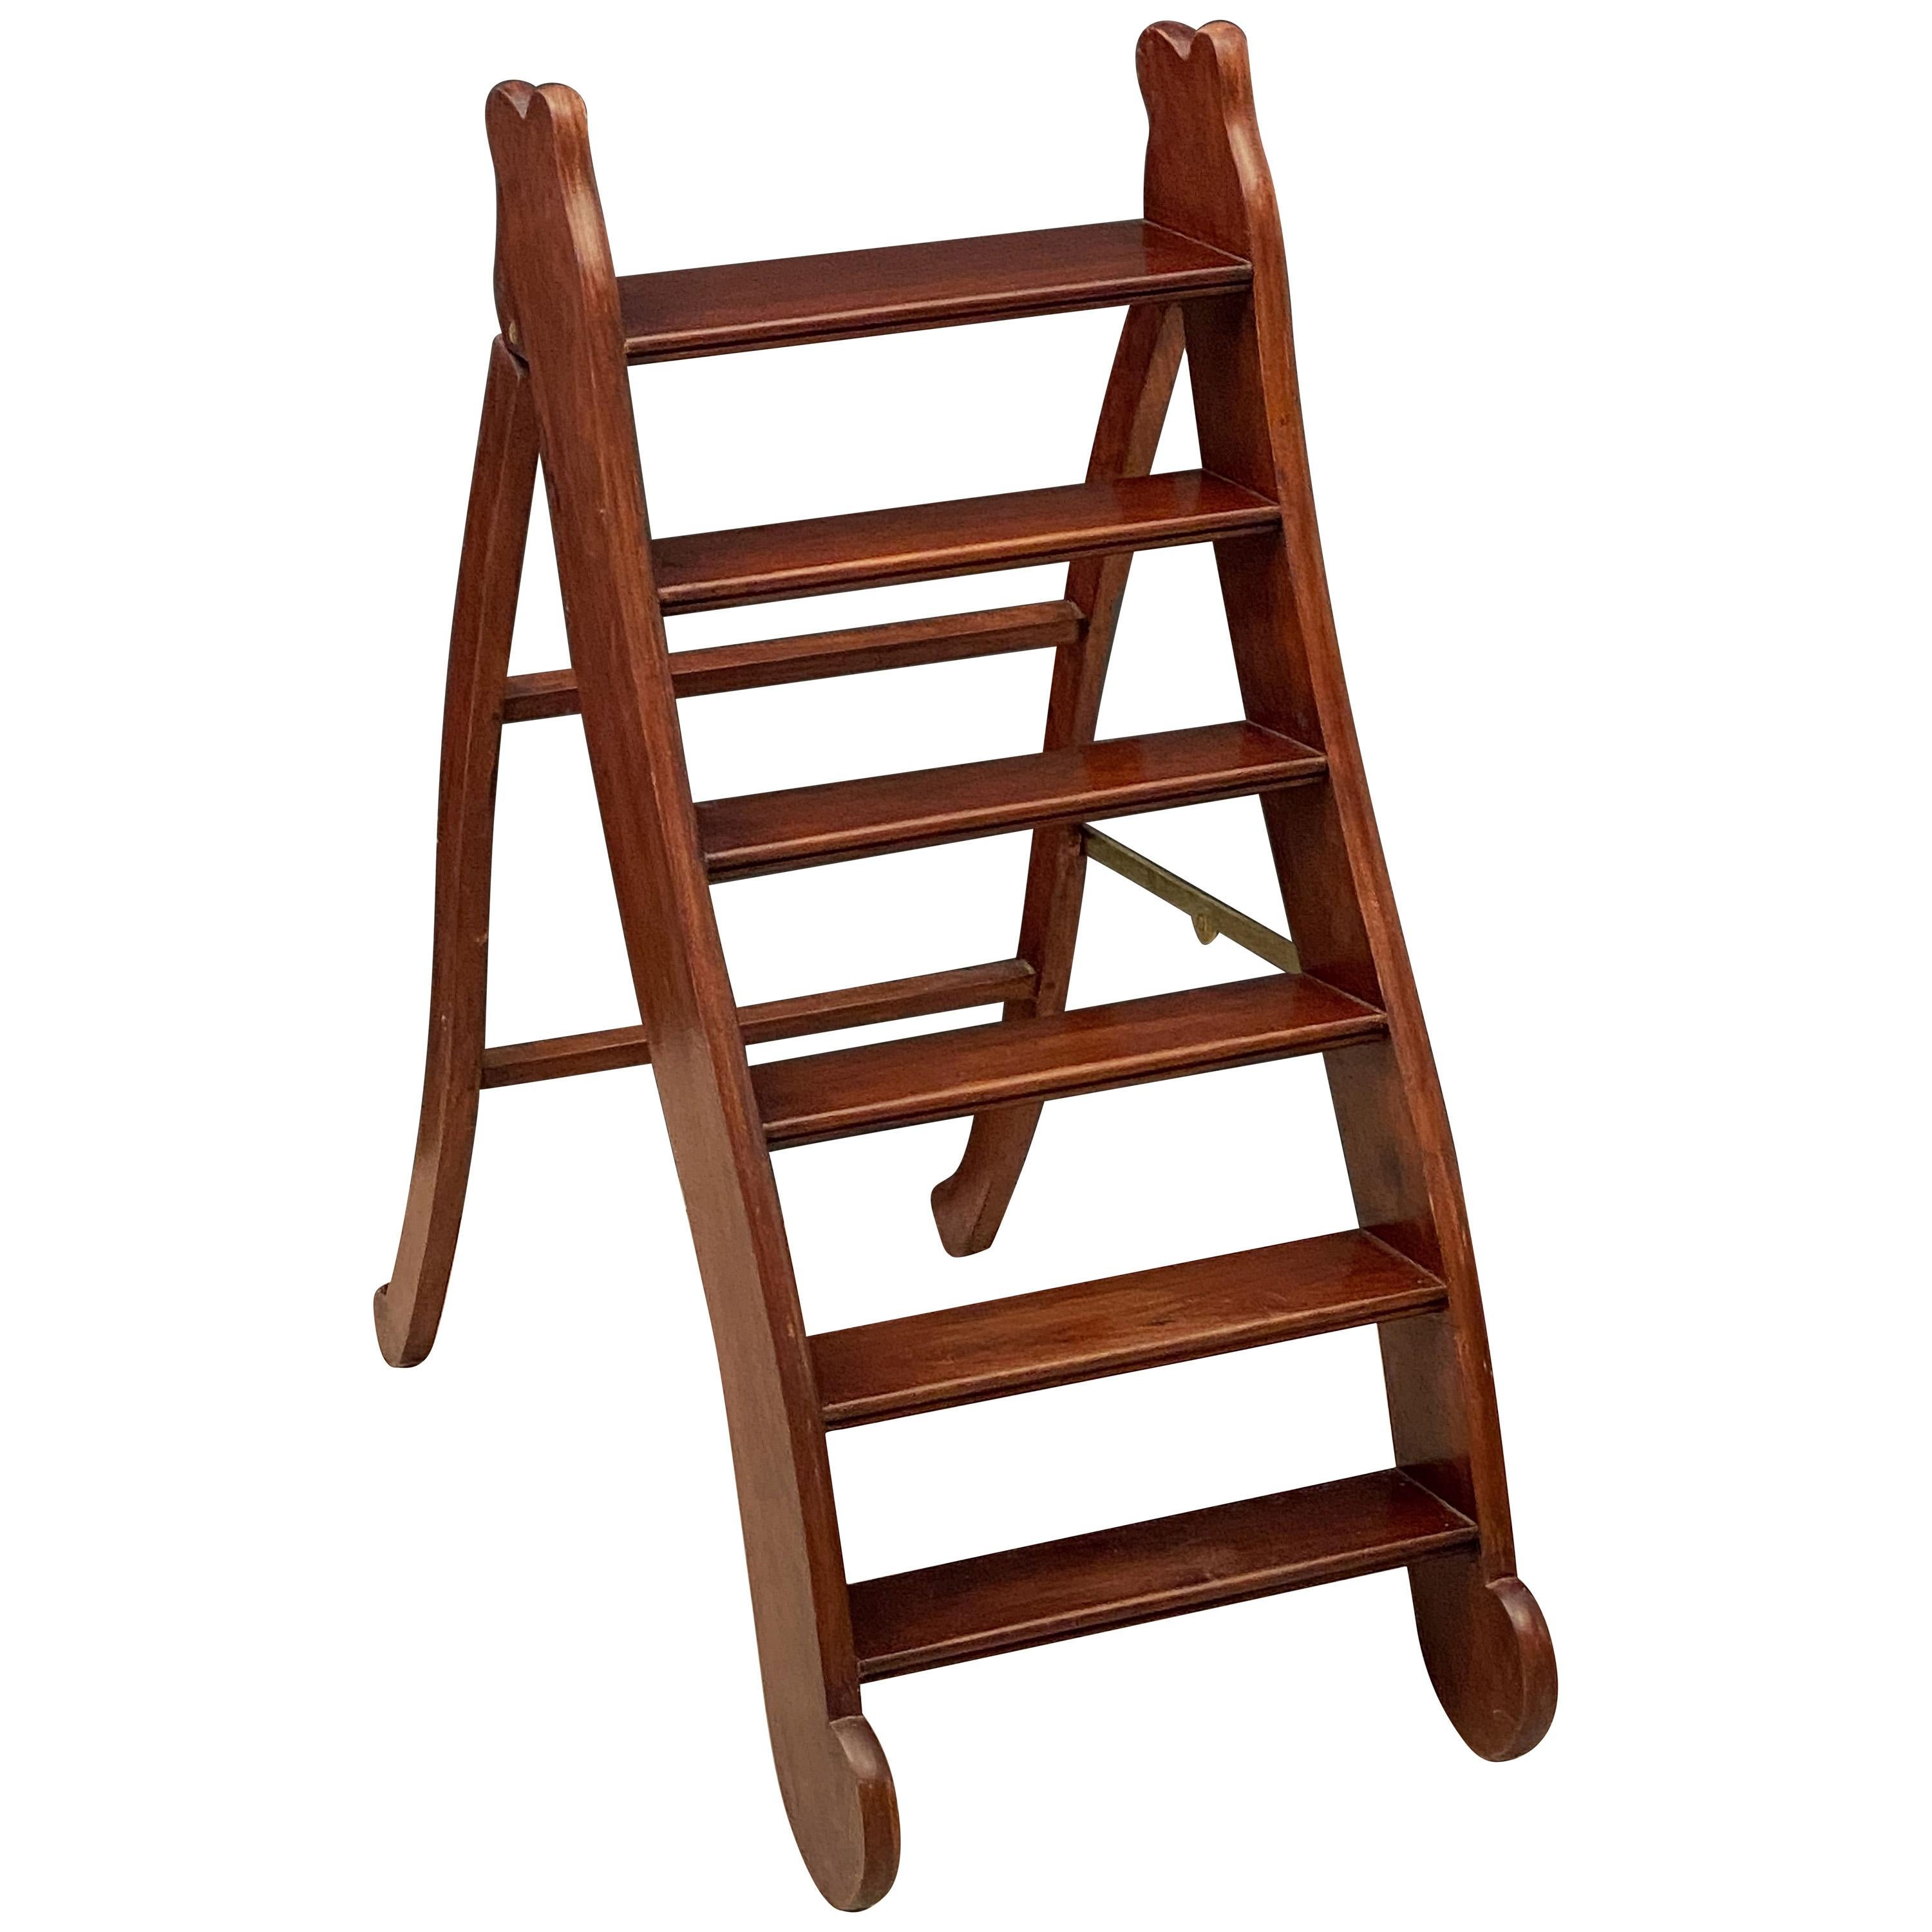 English Folding Library Step Ladder of Mahogany and Brass from the Edwardian Era